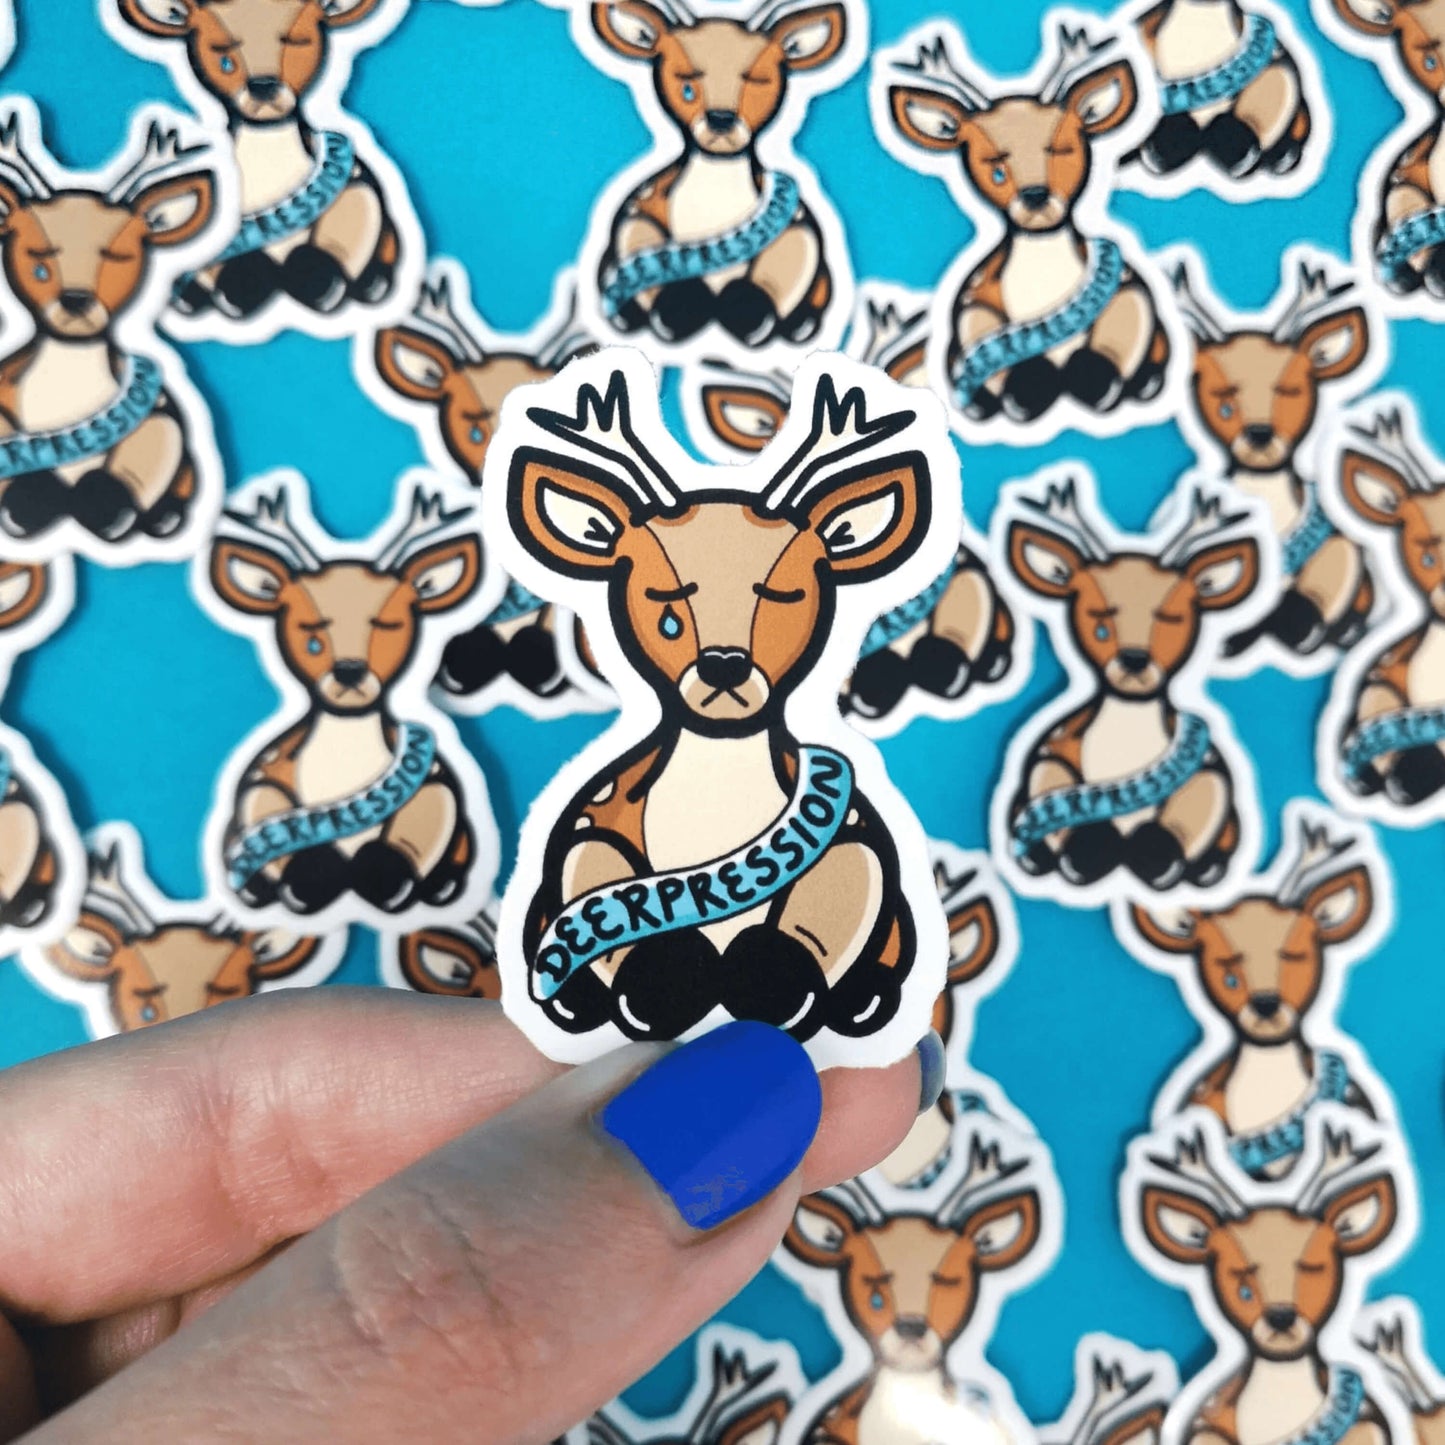 The Deerpression Sticker - Depression being held over multiple copies of the sticker on a blue background by a hand wearing blue nail varnish. The deer shaped sticker has its eyes closed with a tear falling down one cheek, across its middle is a blue banner with black text reading 'deerpression'. The design was created to raise awareness for depression.